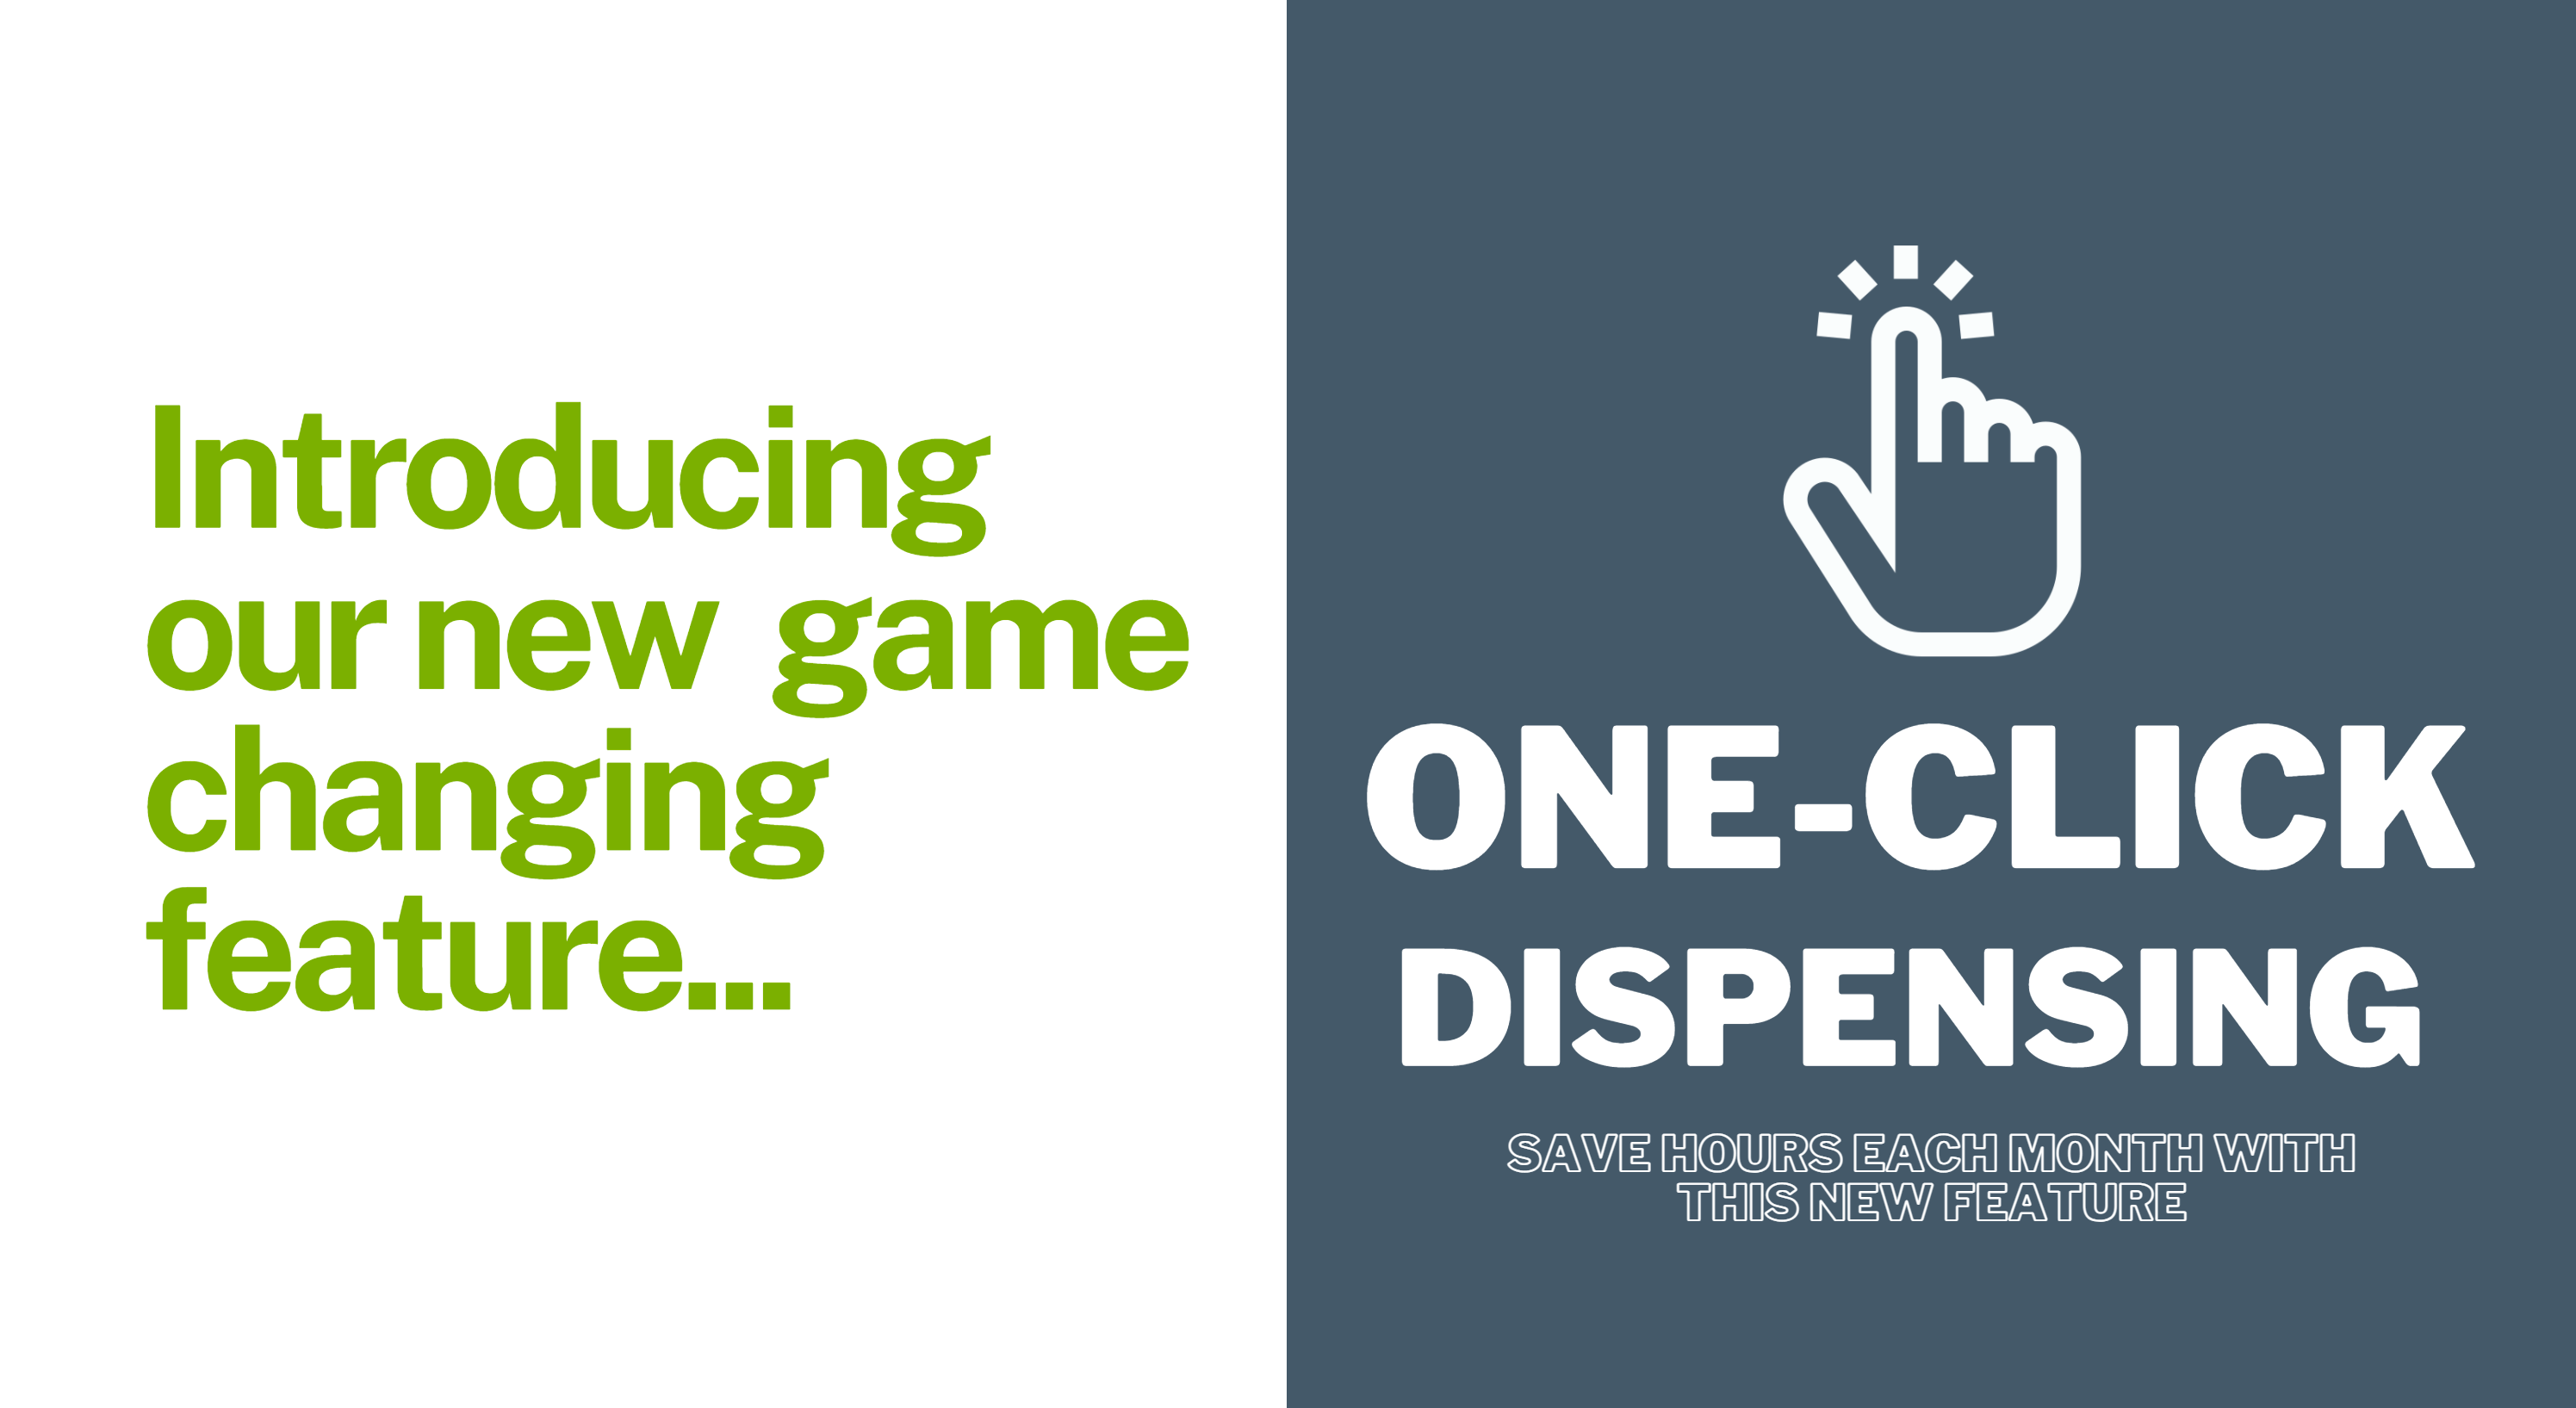 One-Click Dispensing is here!